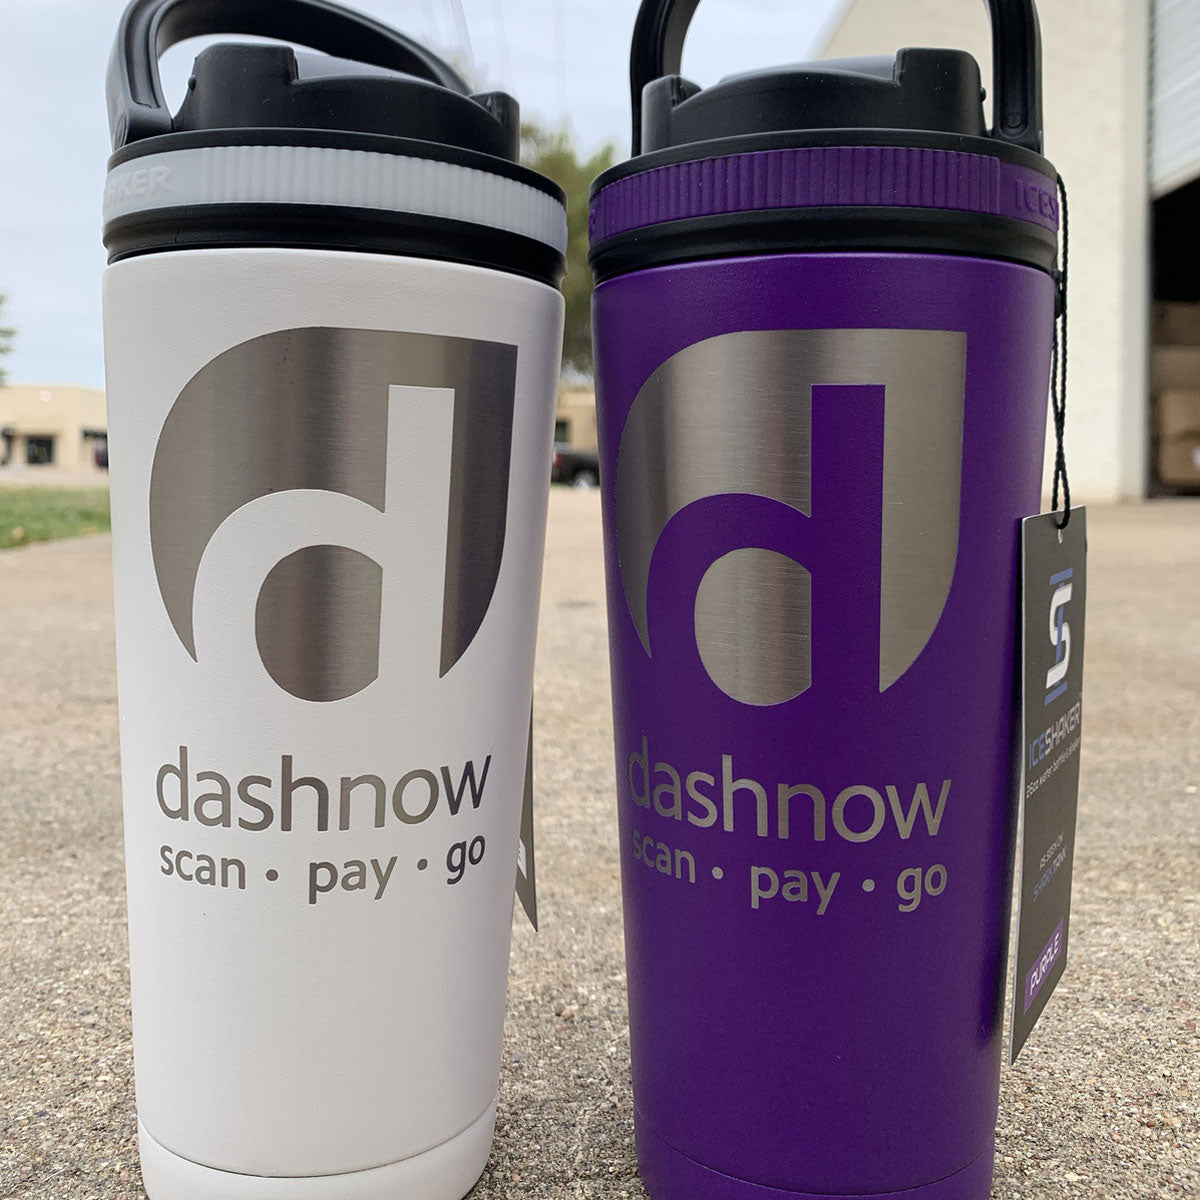 2 26oz Ice Shakers with Dashnow: Scan, pay, go logo engraved on them.